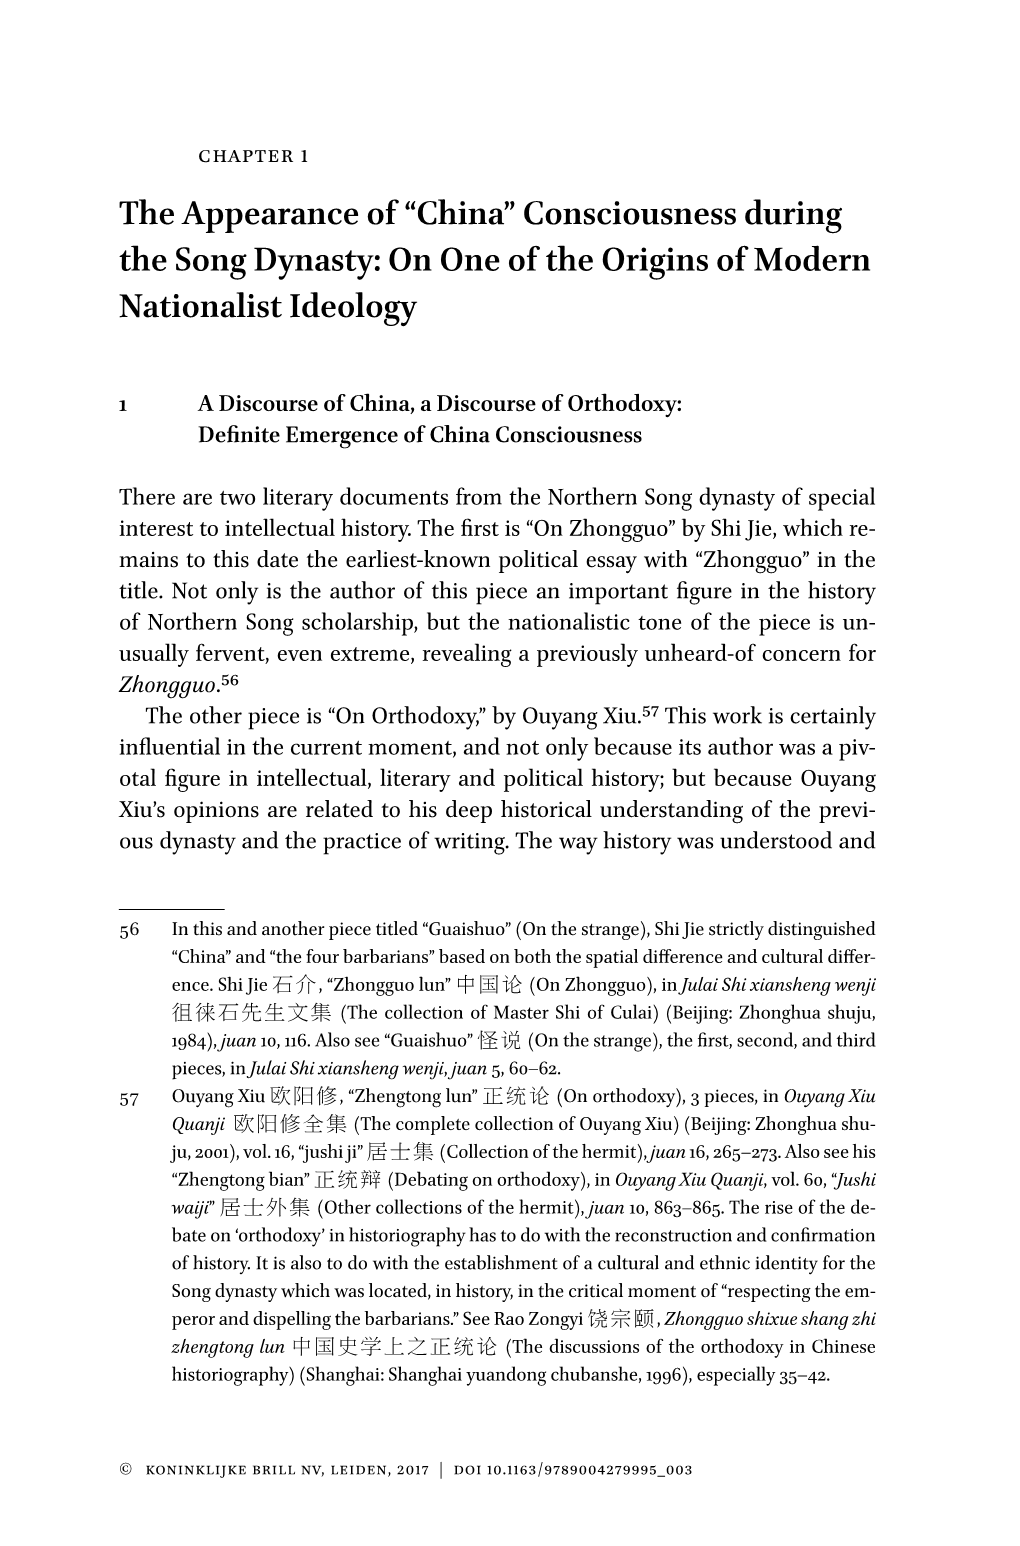 Consciousness During the Song Dynasty: on One of the Origins of Modern Nationalist Ideology